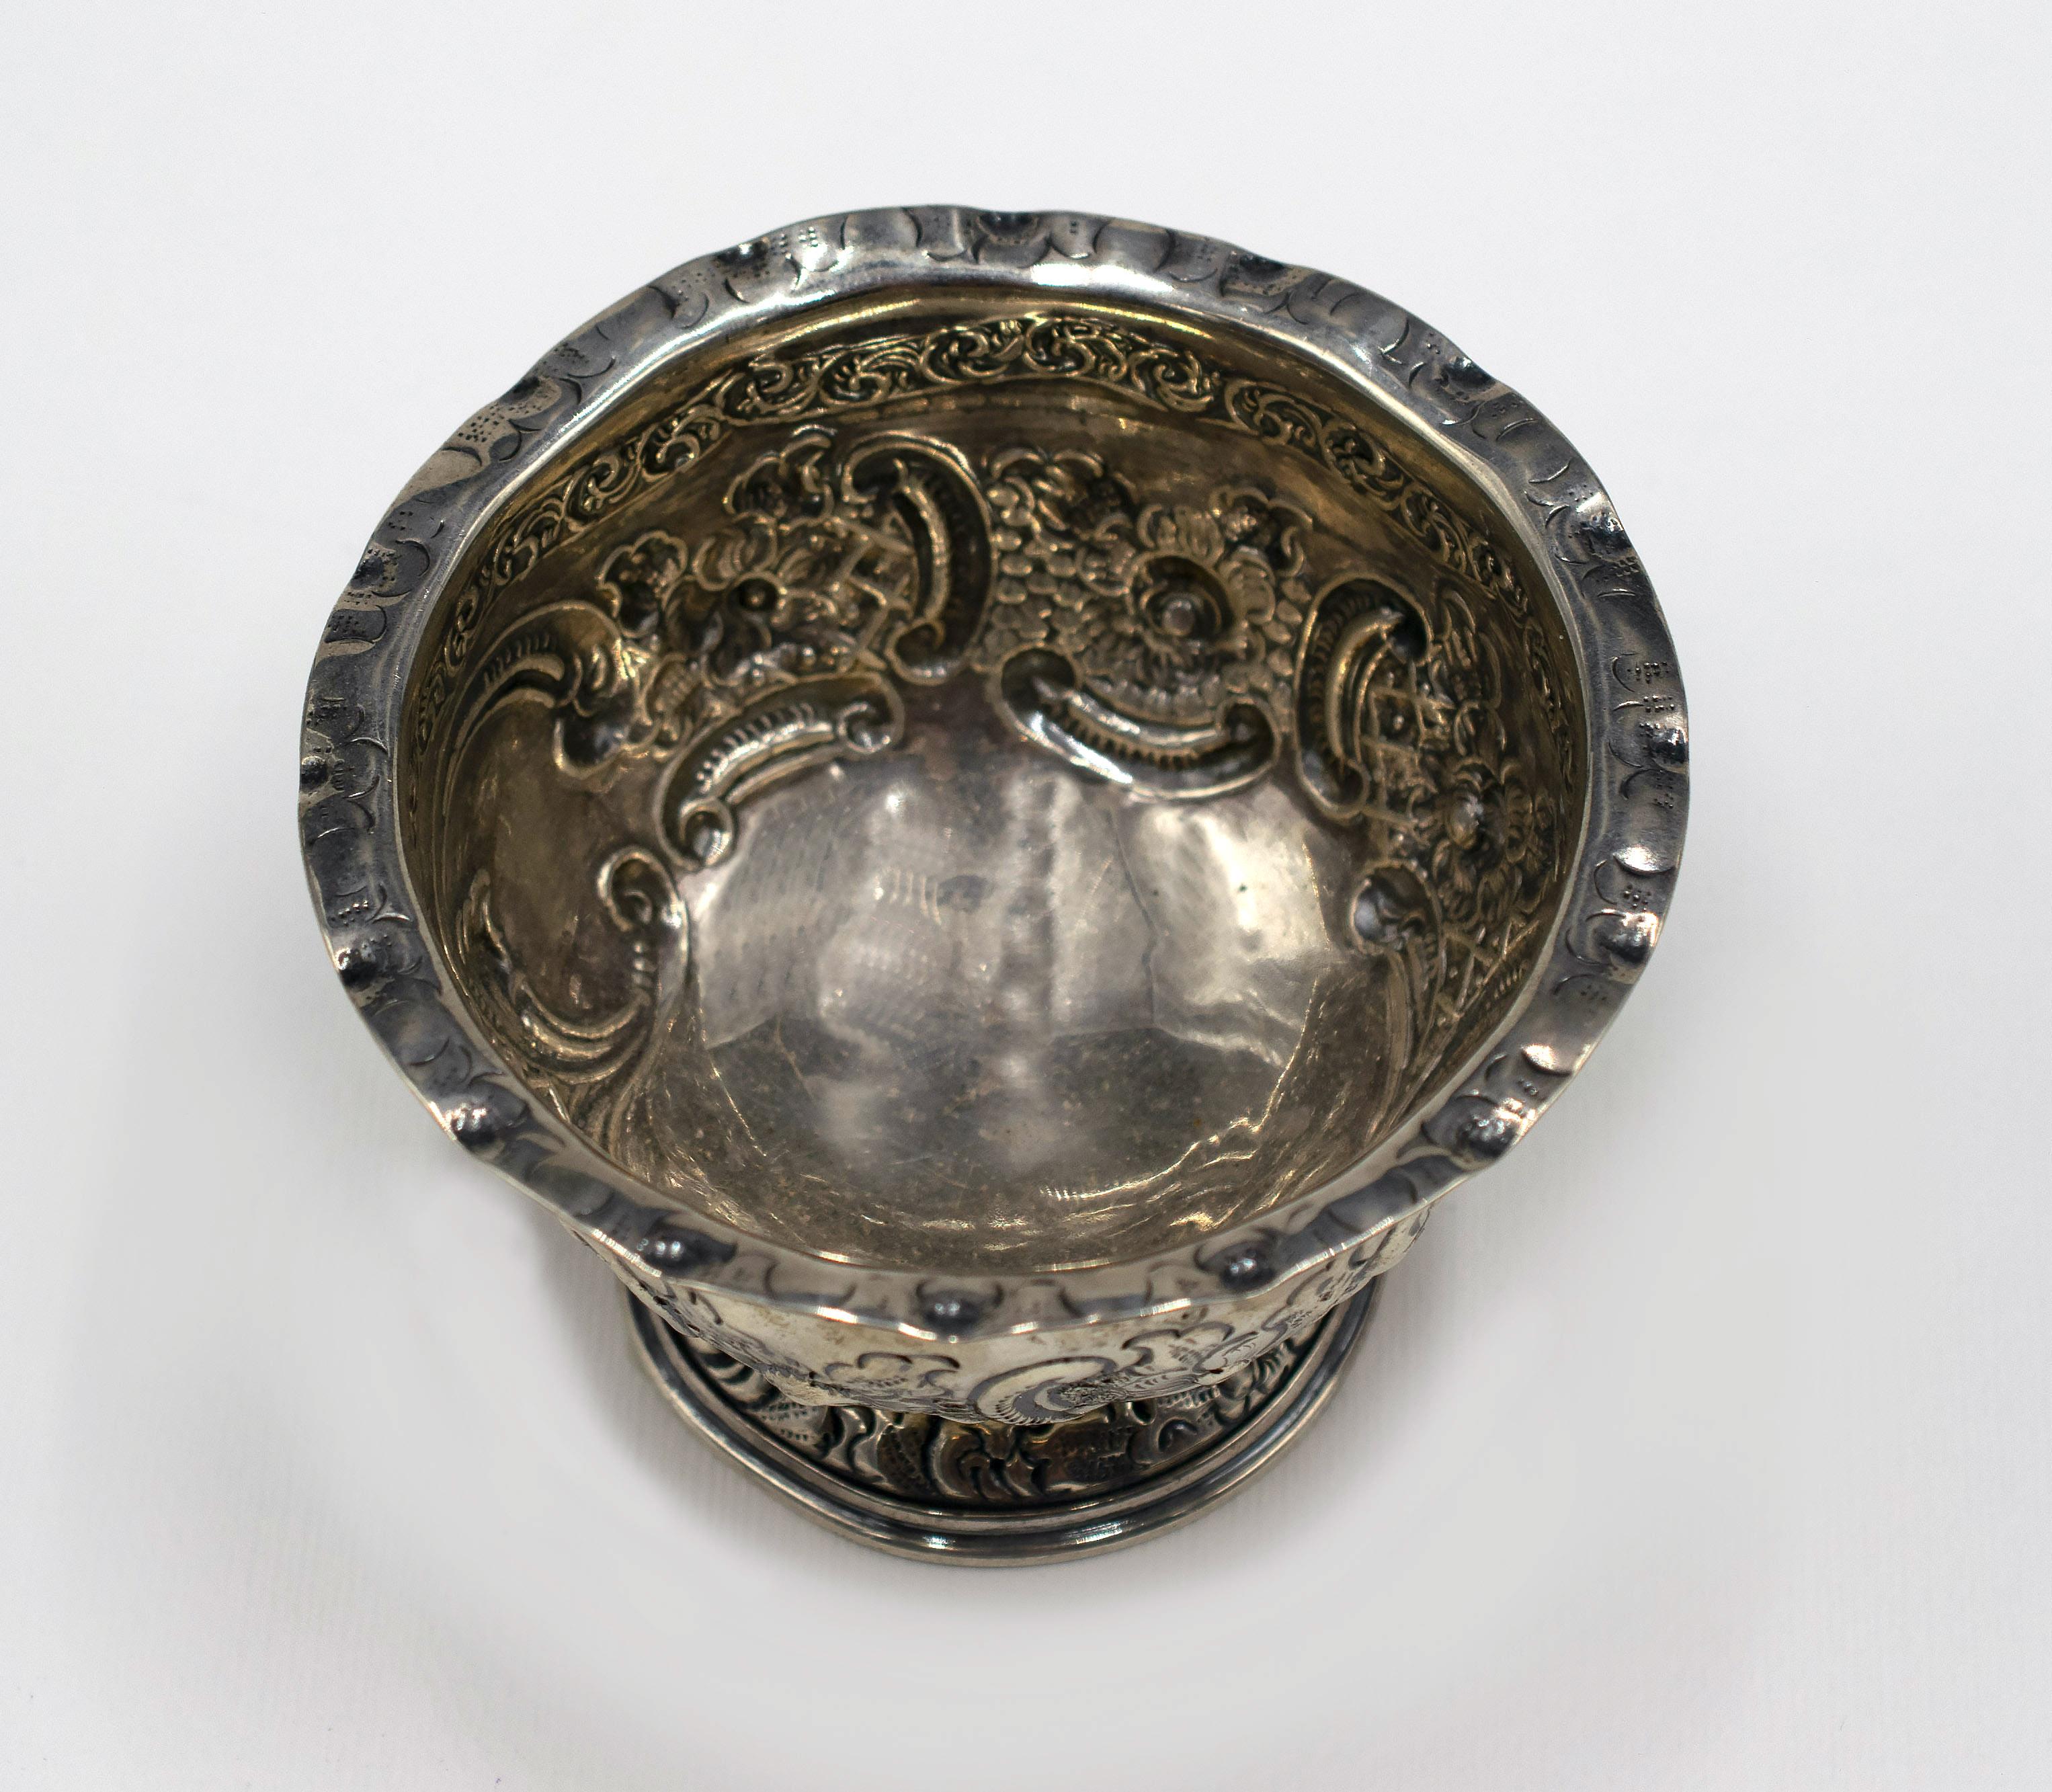 Silver bowl is a precious decorative object realized in 20th century.

Very elegant silver bowl with very refied floral decorations

Marked with stamps under the base.

In good conditions.